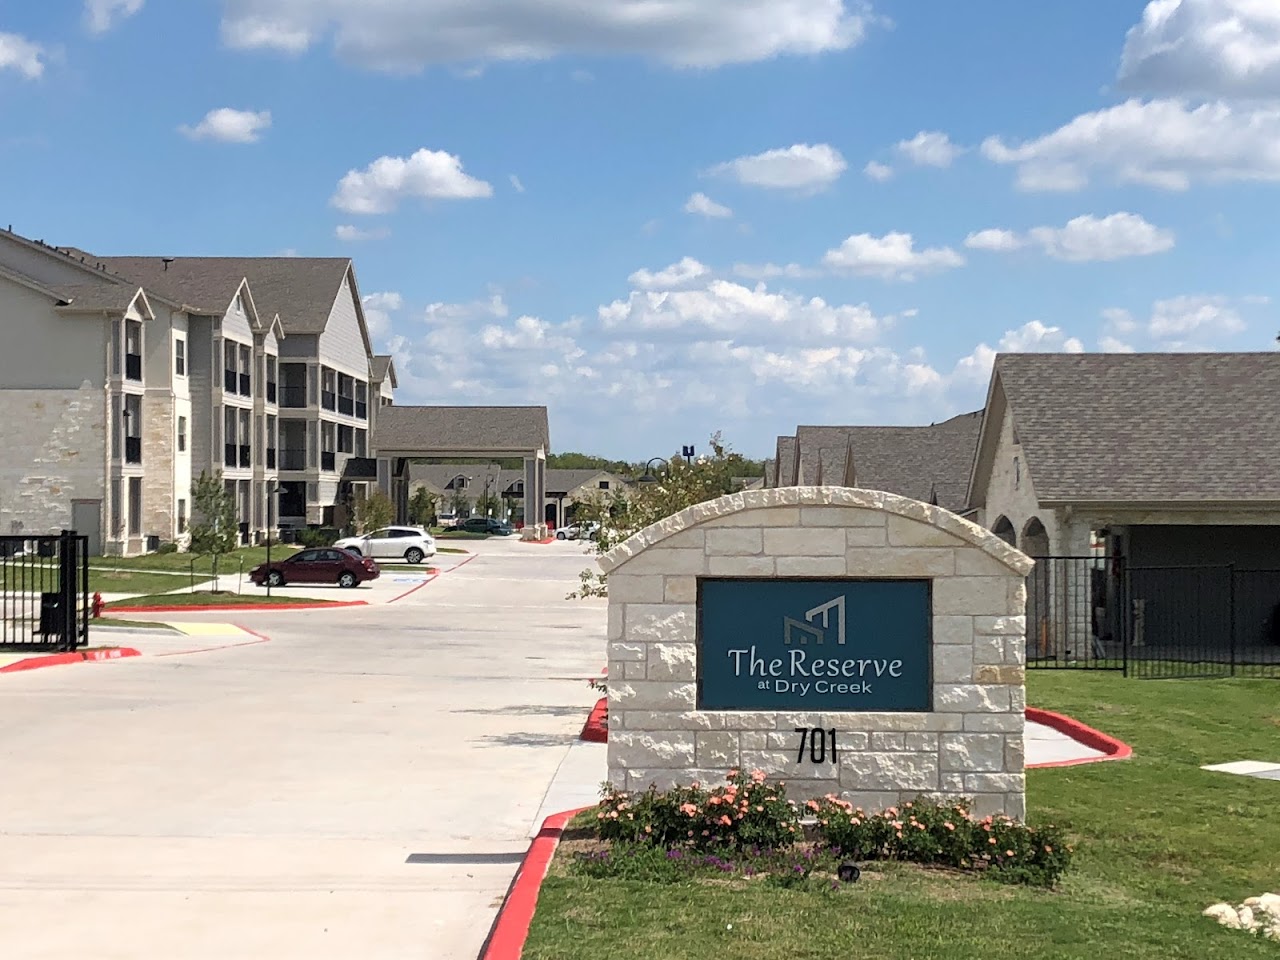 Photo of THE RESERVE AT DRY CREEK. Affordable housing located at 701 N OLD TEMPLE HWY HEWITT, TX 76643